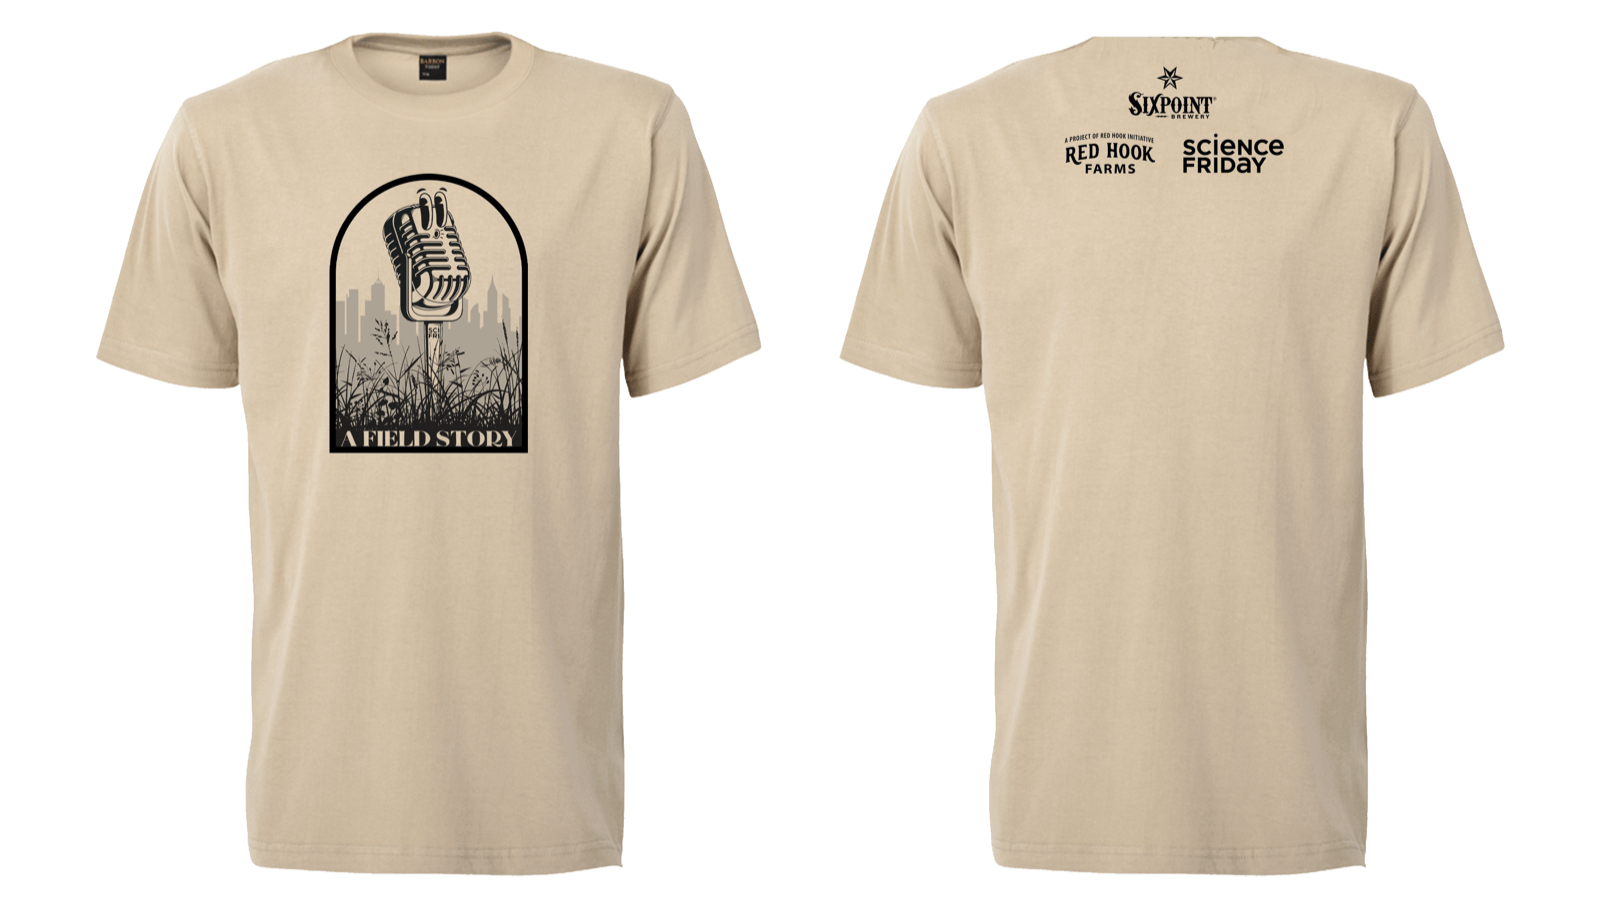 two images of the same t-shirt, showed front and back. it's beige with an illustration on the front depicting an old-school microphone with cartoon eyes whistling, sitting in a field of grass. below the illustration is text that says 'a field story.' on the back are three logos: for science friday, sixpoint brewing, and redhook farms